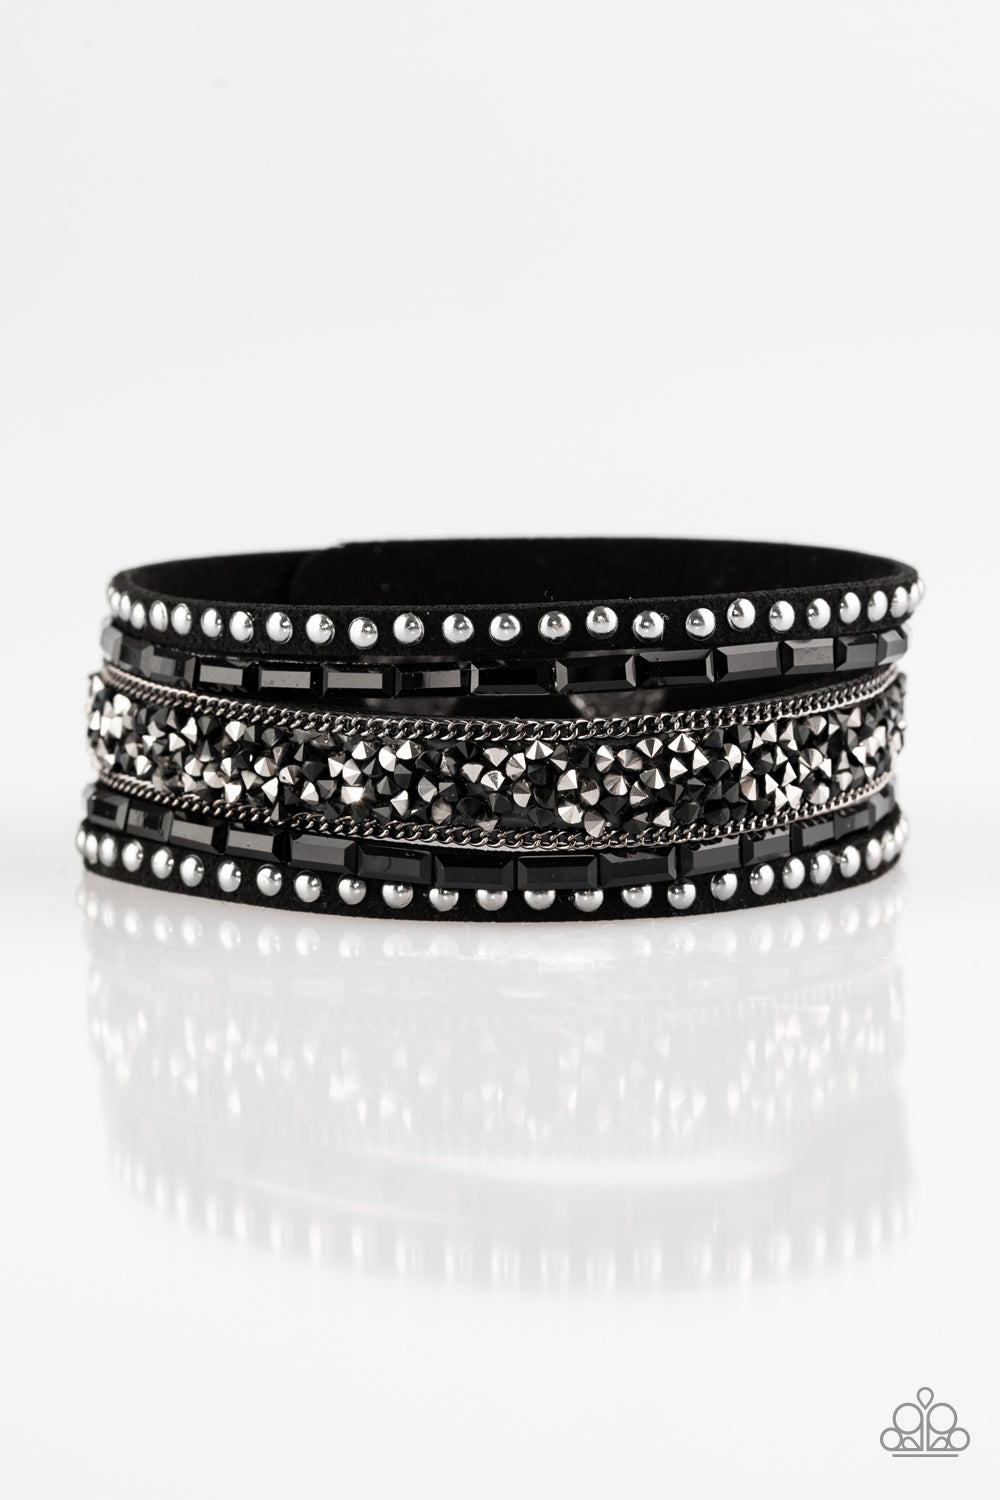 Featuring edgy emerald and prism style cuts, black and hematite rhinestones are encrusted down the center of a black suede band that has been spliced into three. Shiny gunmetal studs and glistening gunmetal chains are added for a sassy industrial finish. Features an adjustable snap closure.